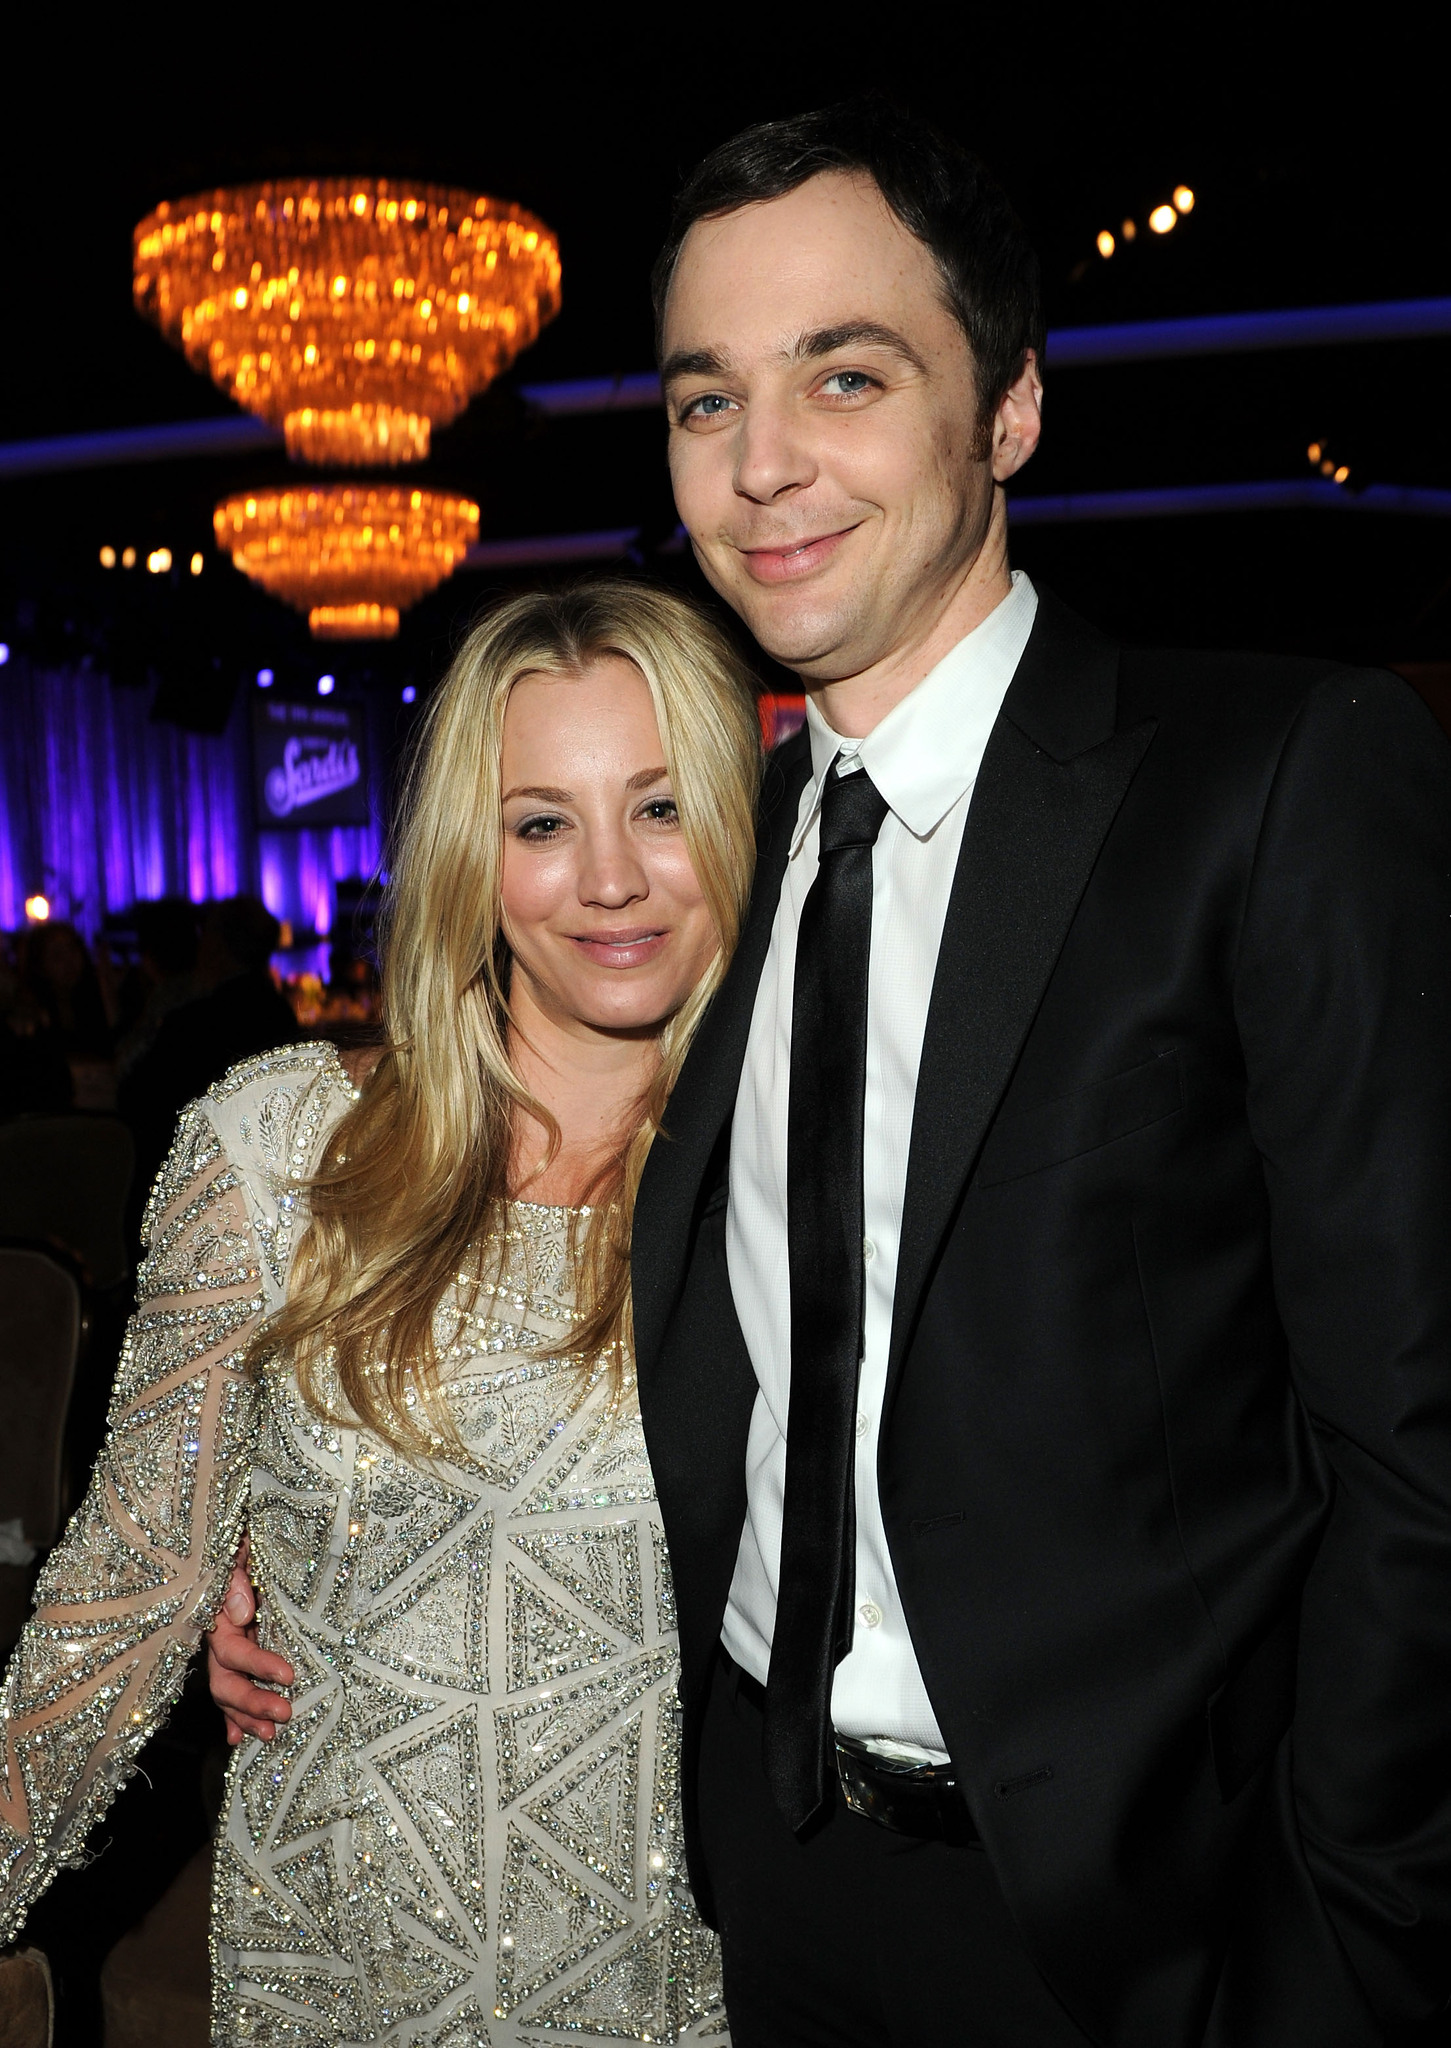 Kaley Cuoco and Jim Parsons